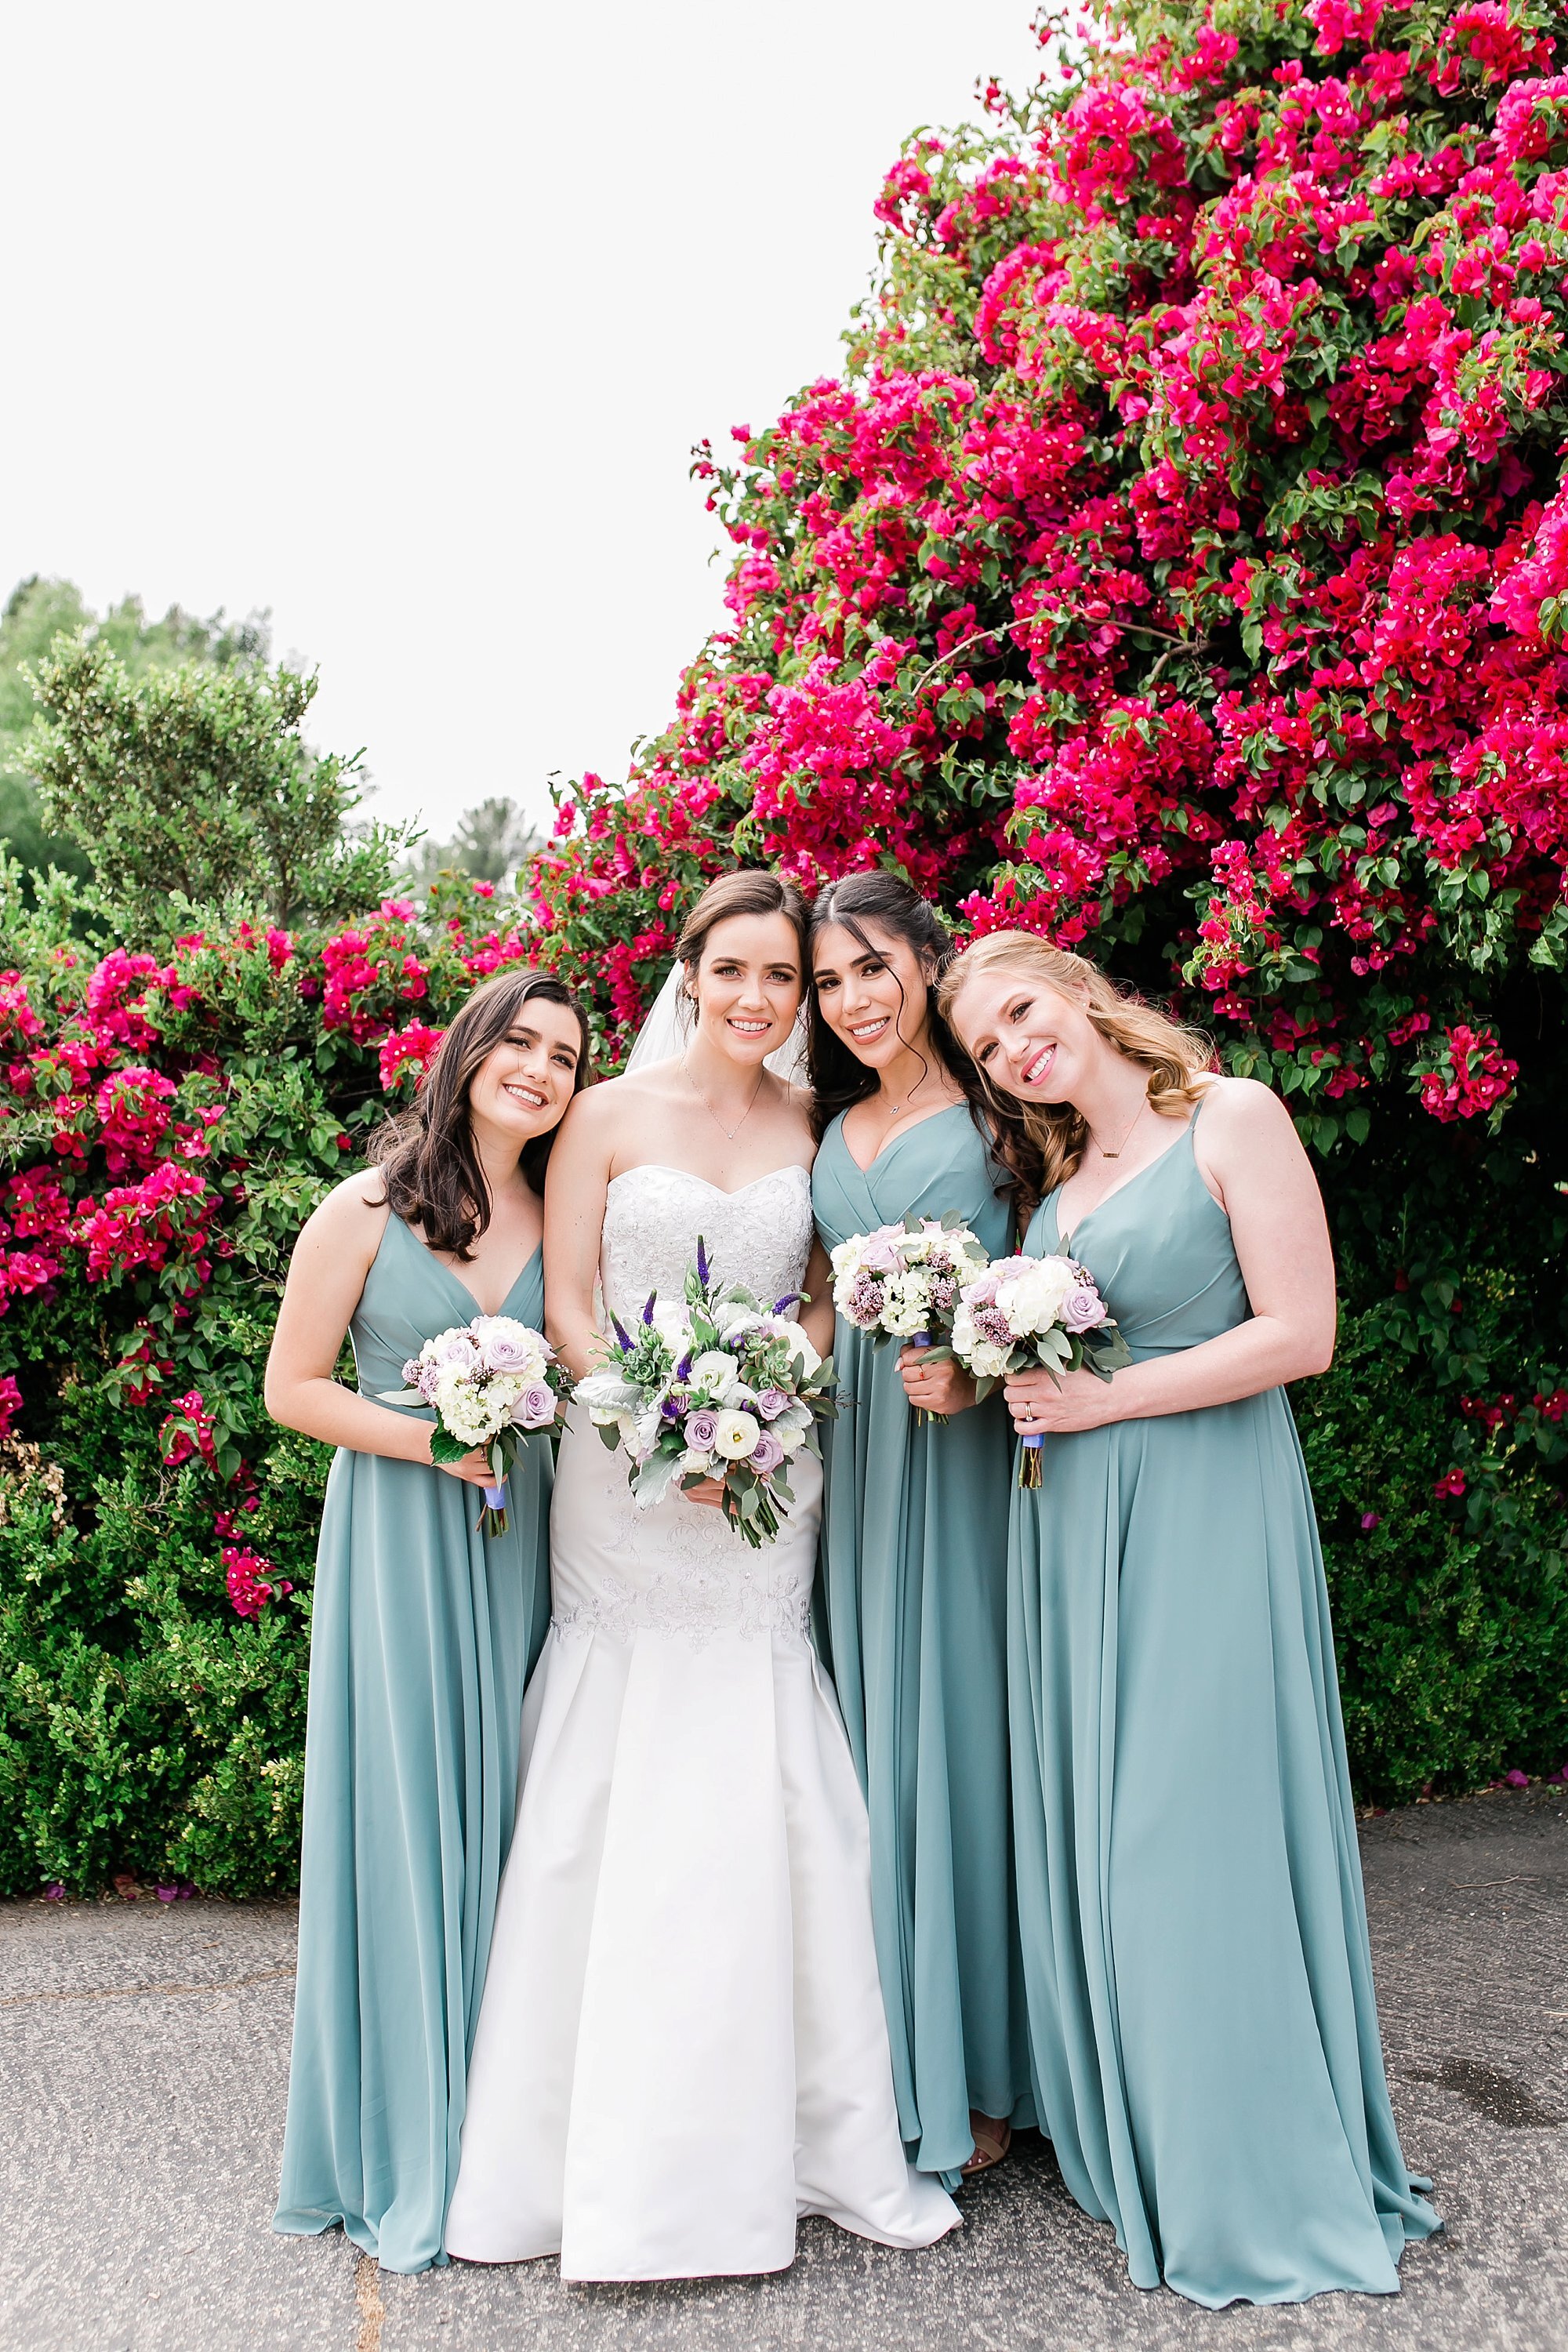  bridal party near the pink flowers 